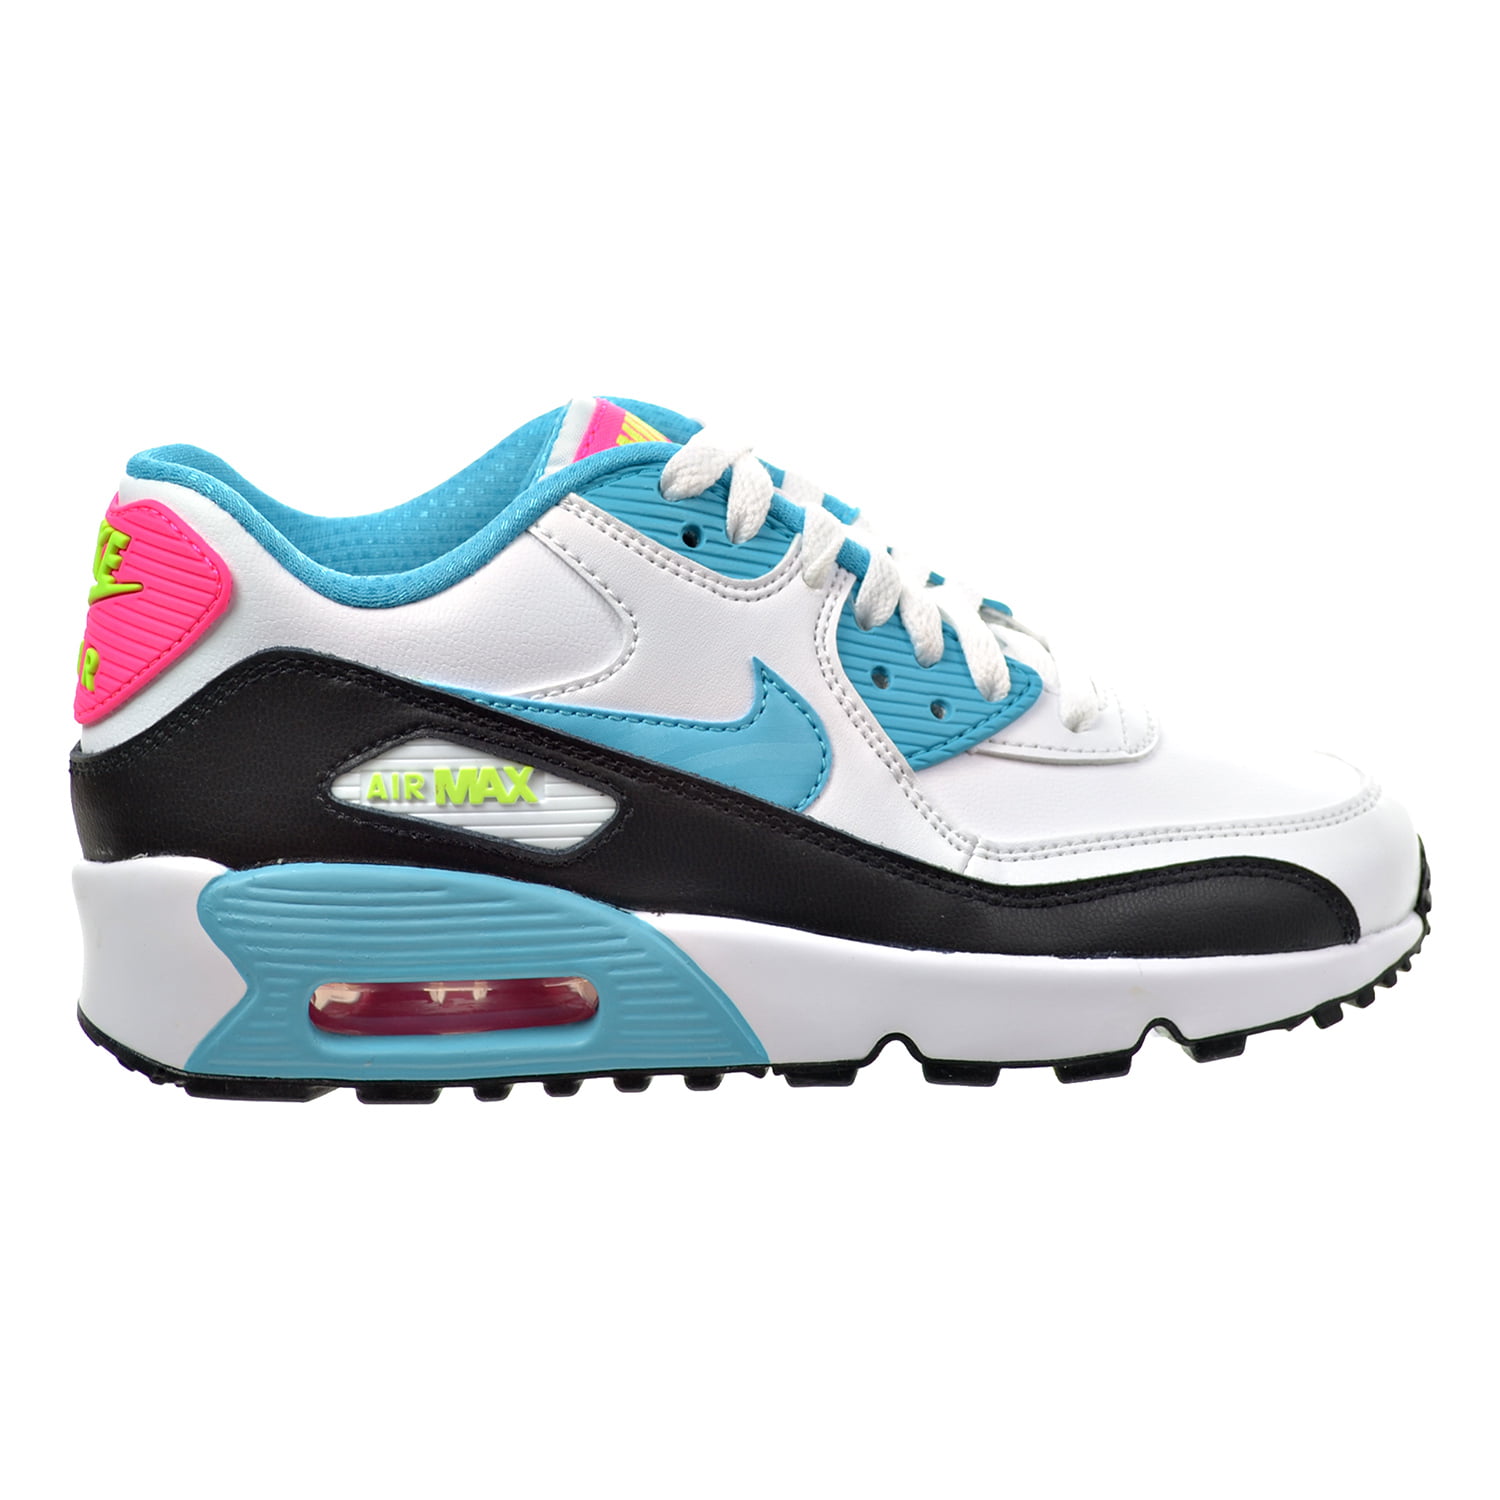 Nike Air Max 90 LTR (GS) Big Kid's Shoes White/Blue/Pink Blast/Ghost ...